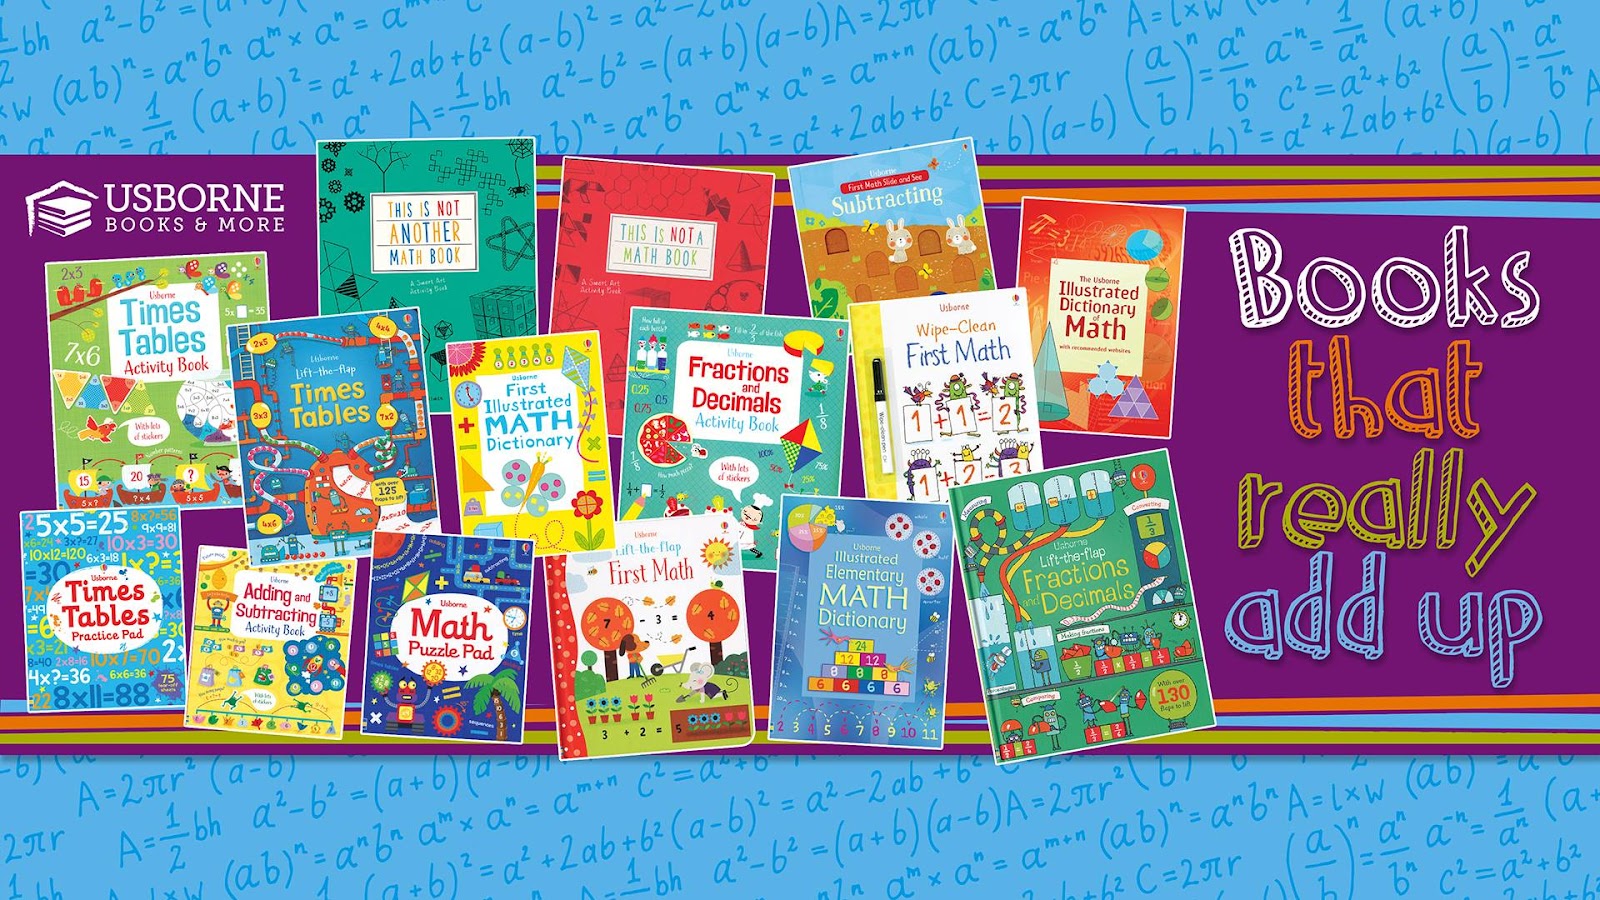 Books that really add up. Use Usborne Books in your homeschool!